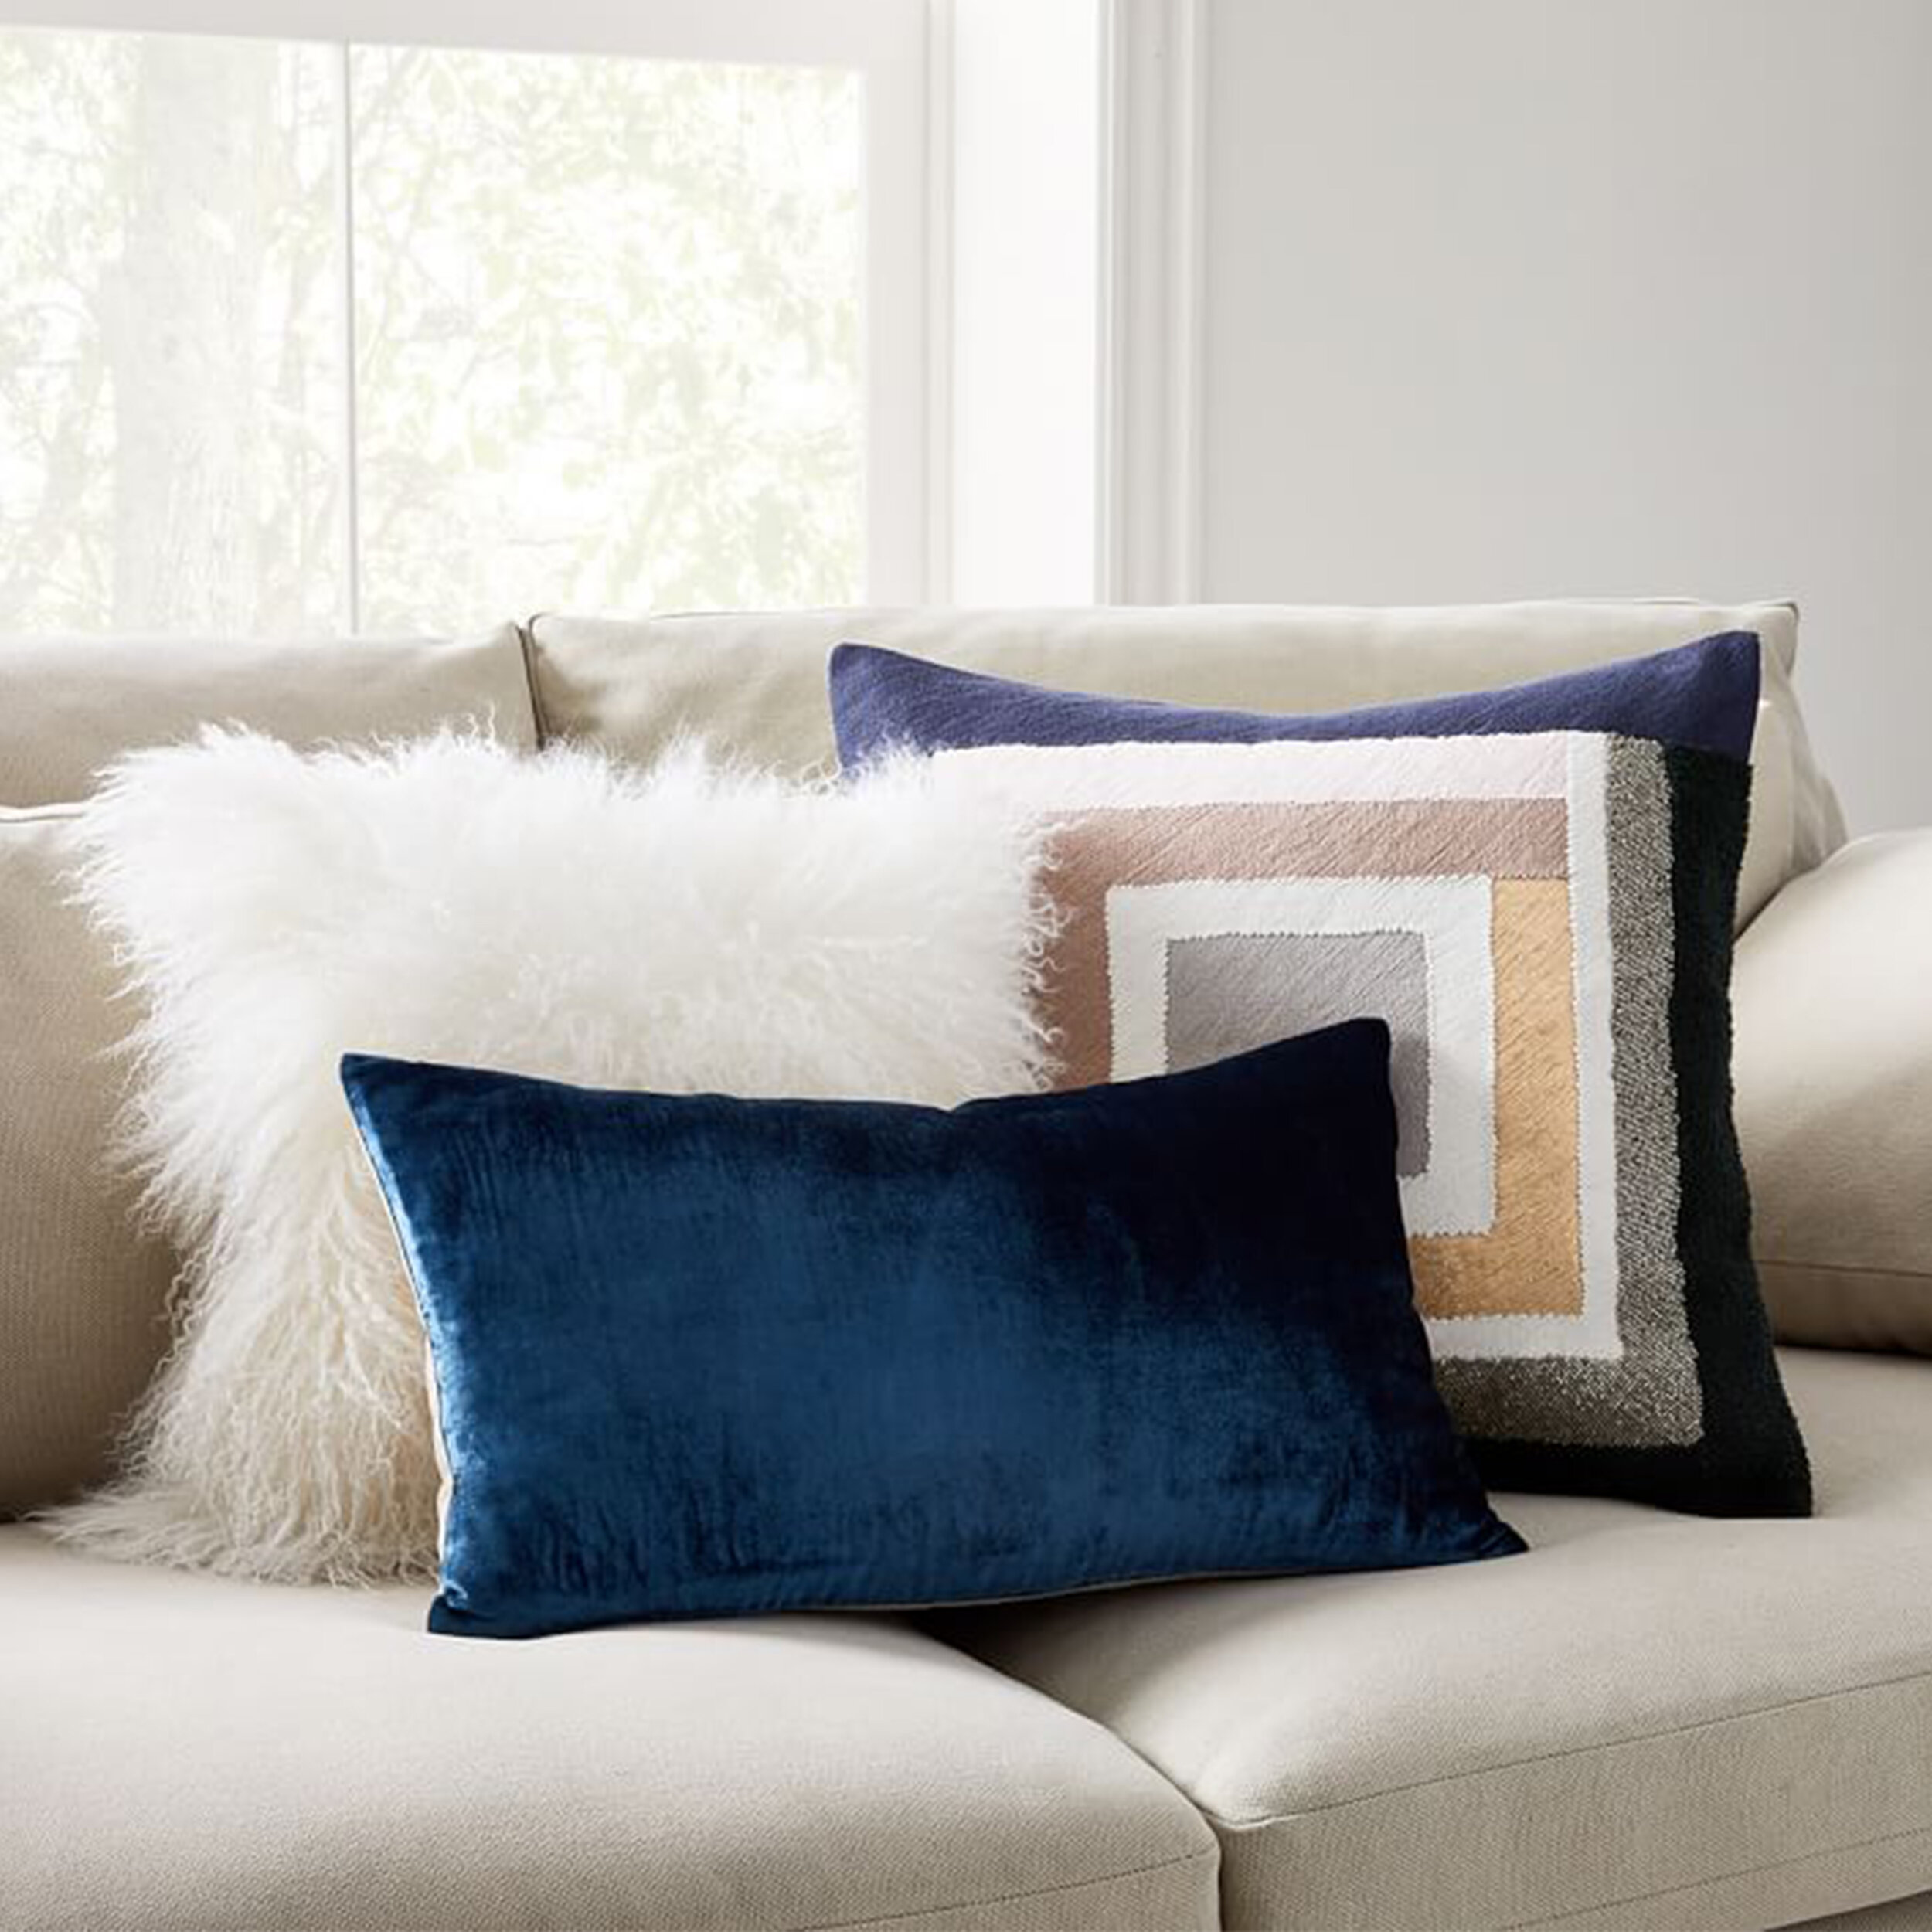 embellished-deco-colorblock-pillow-cover-1-o.jpg